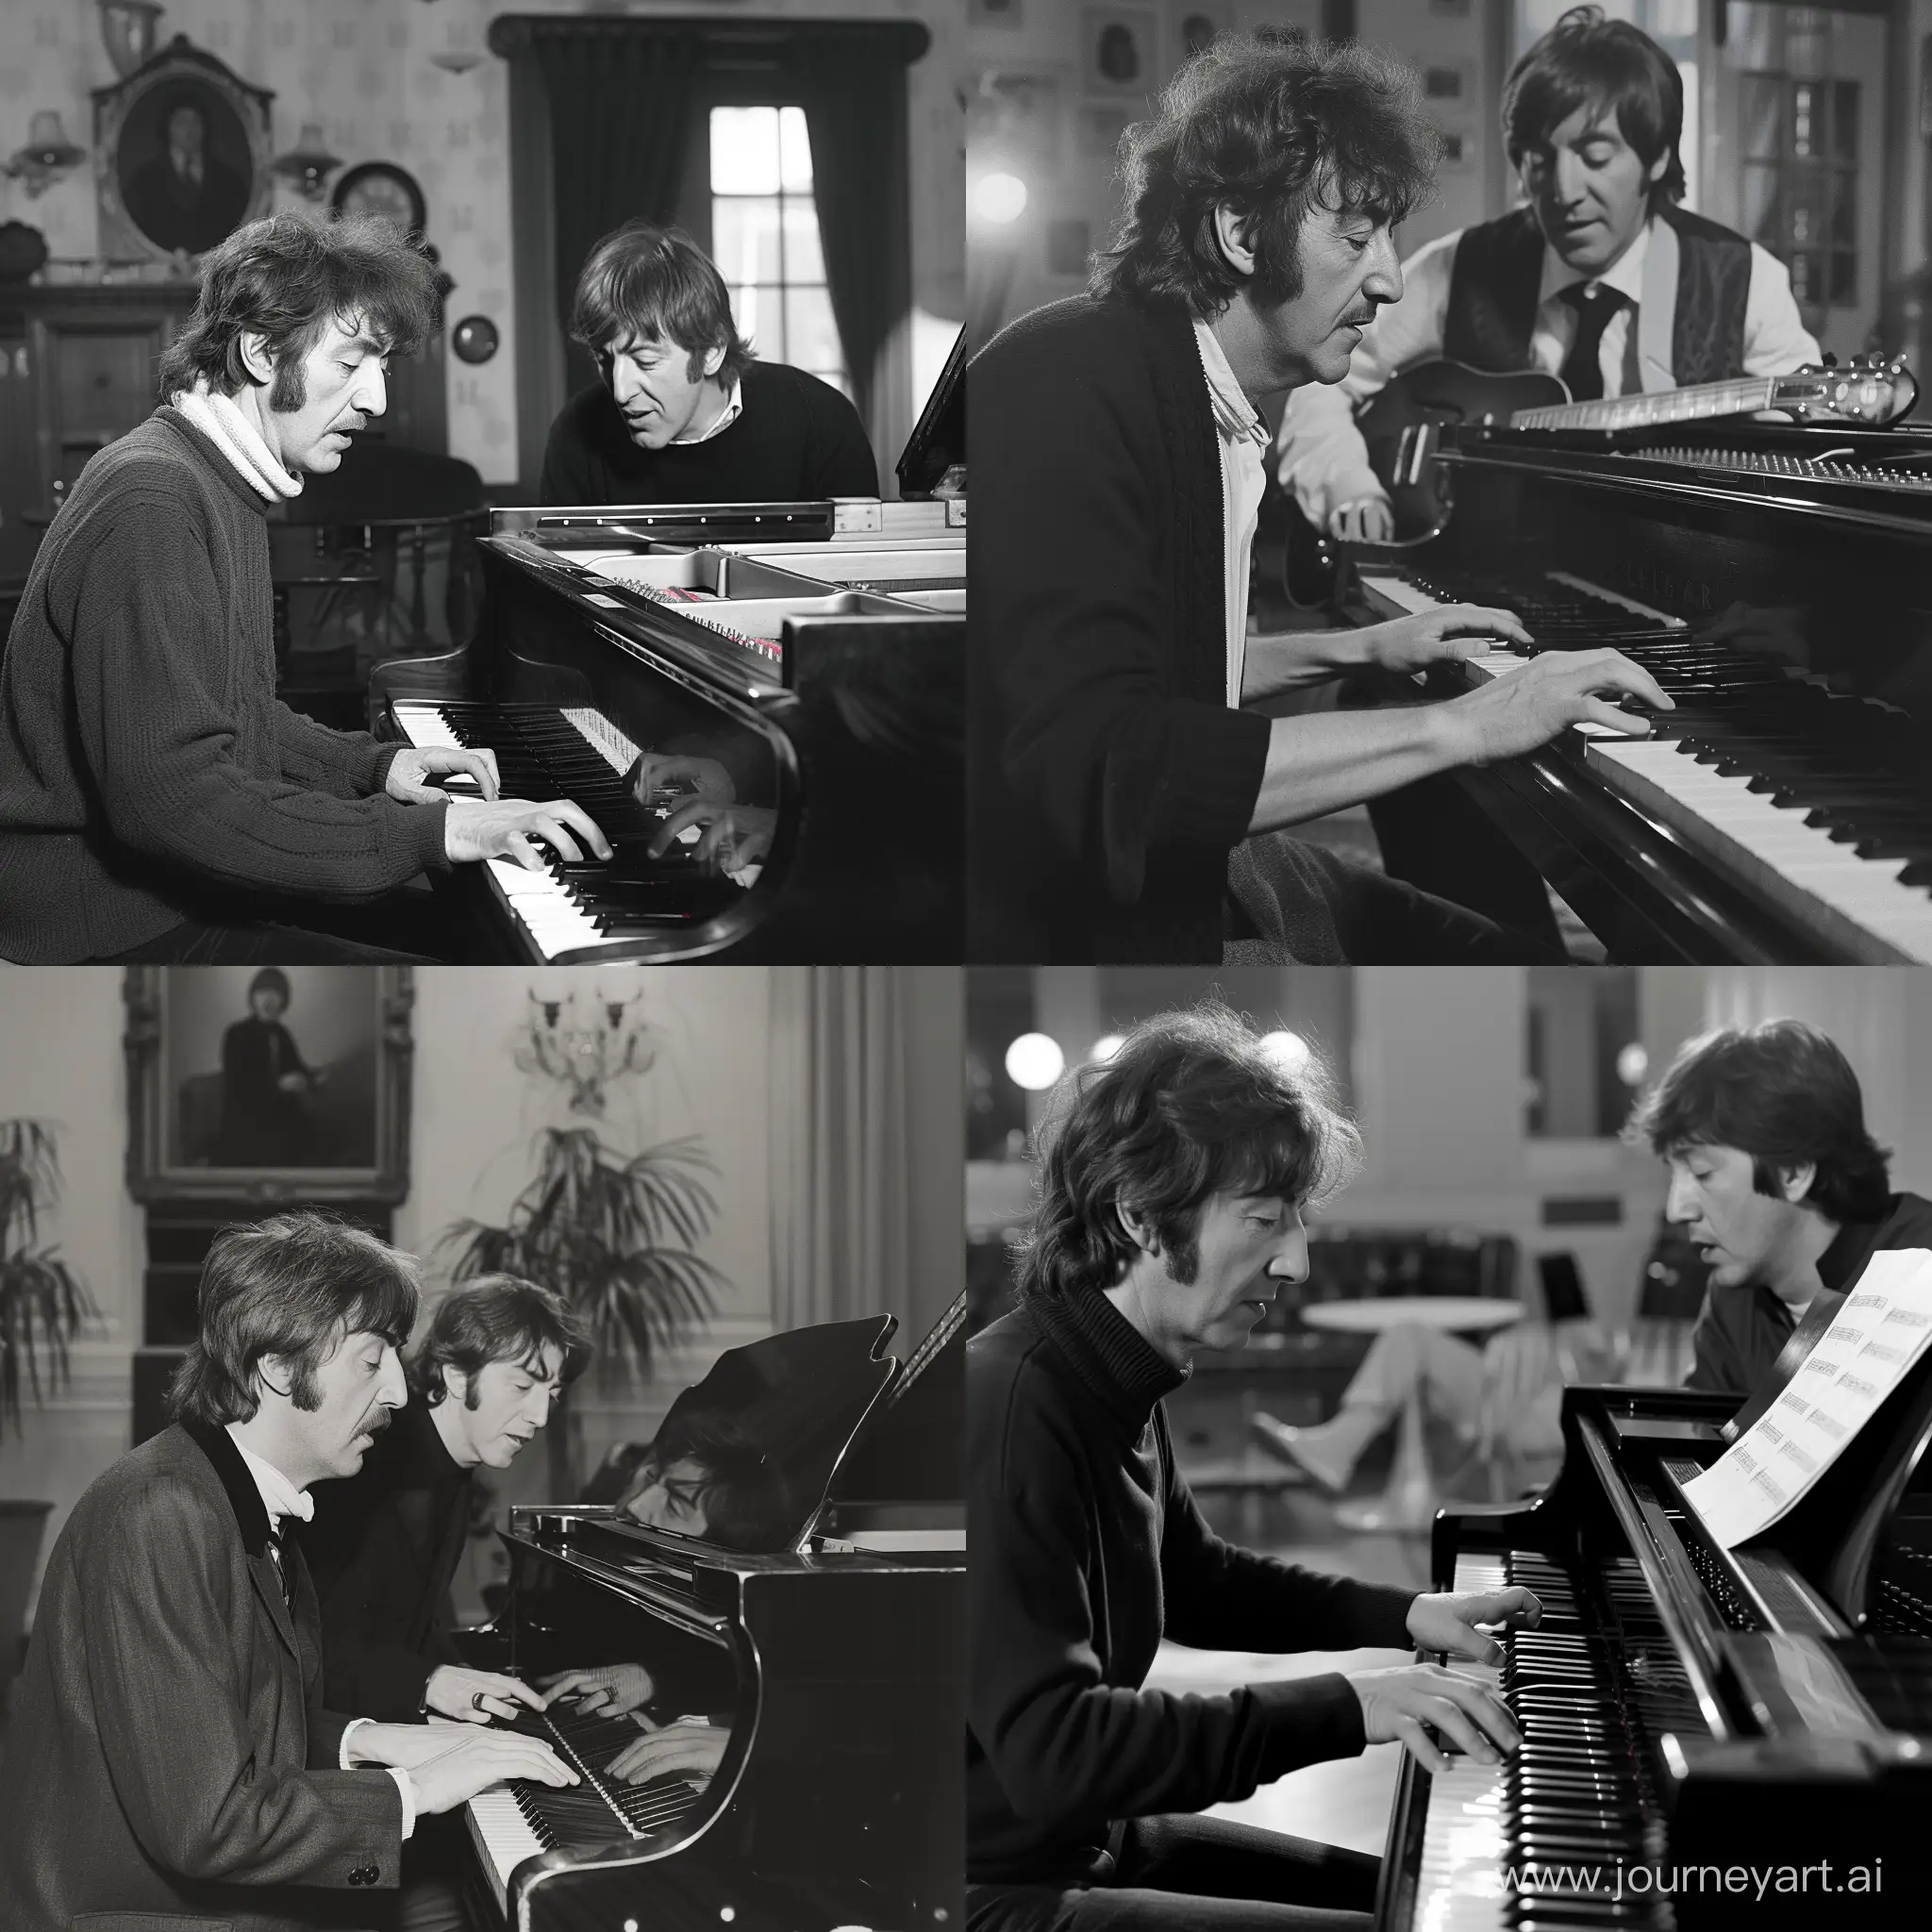 Legendary-Duo-John-Lennon-Playing-Piano-in-the-Style-of-Paul-McCartney